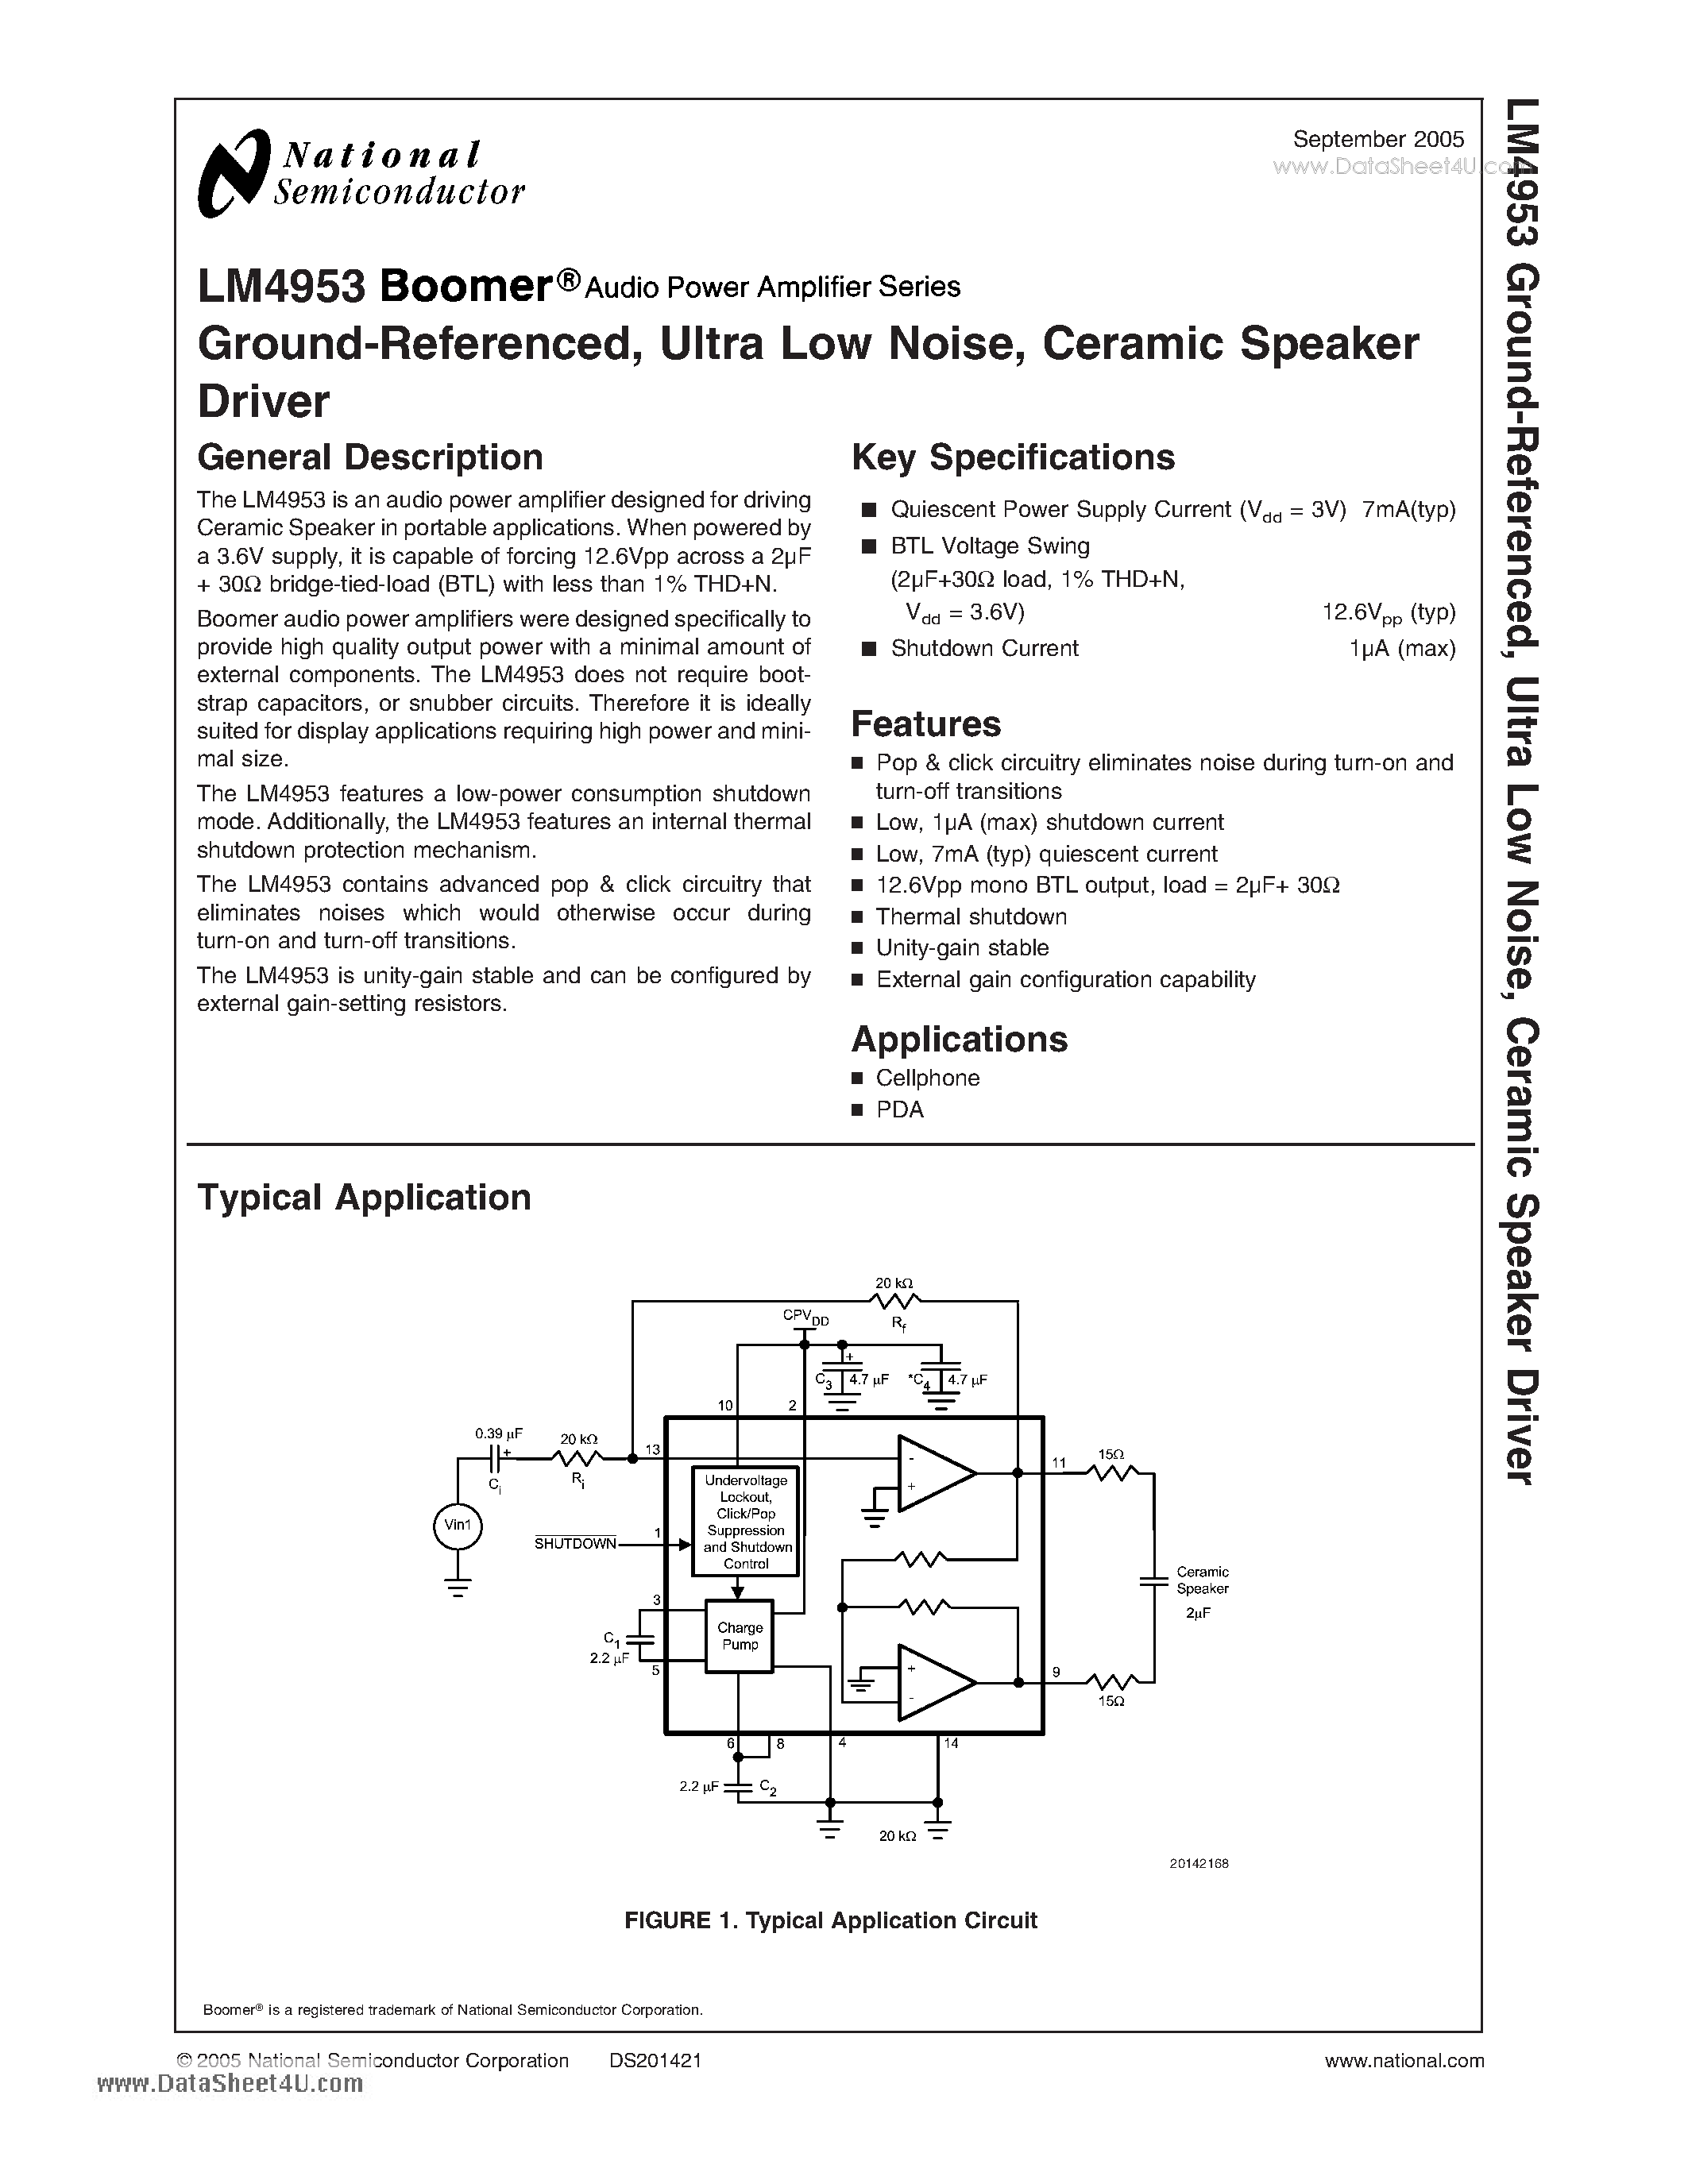 Datasheet LM4953 - Ground-Referenced Ultra Low Noise / Ceramic Speaker Driver page 1